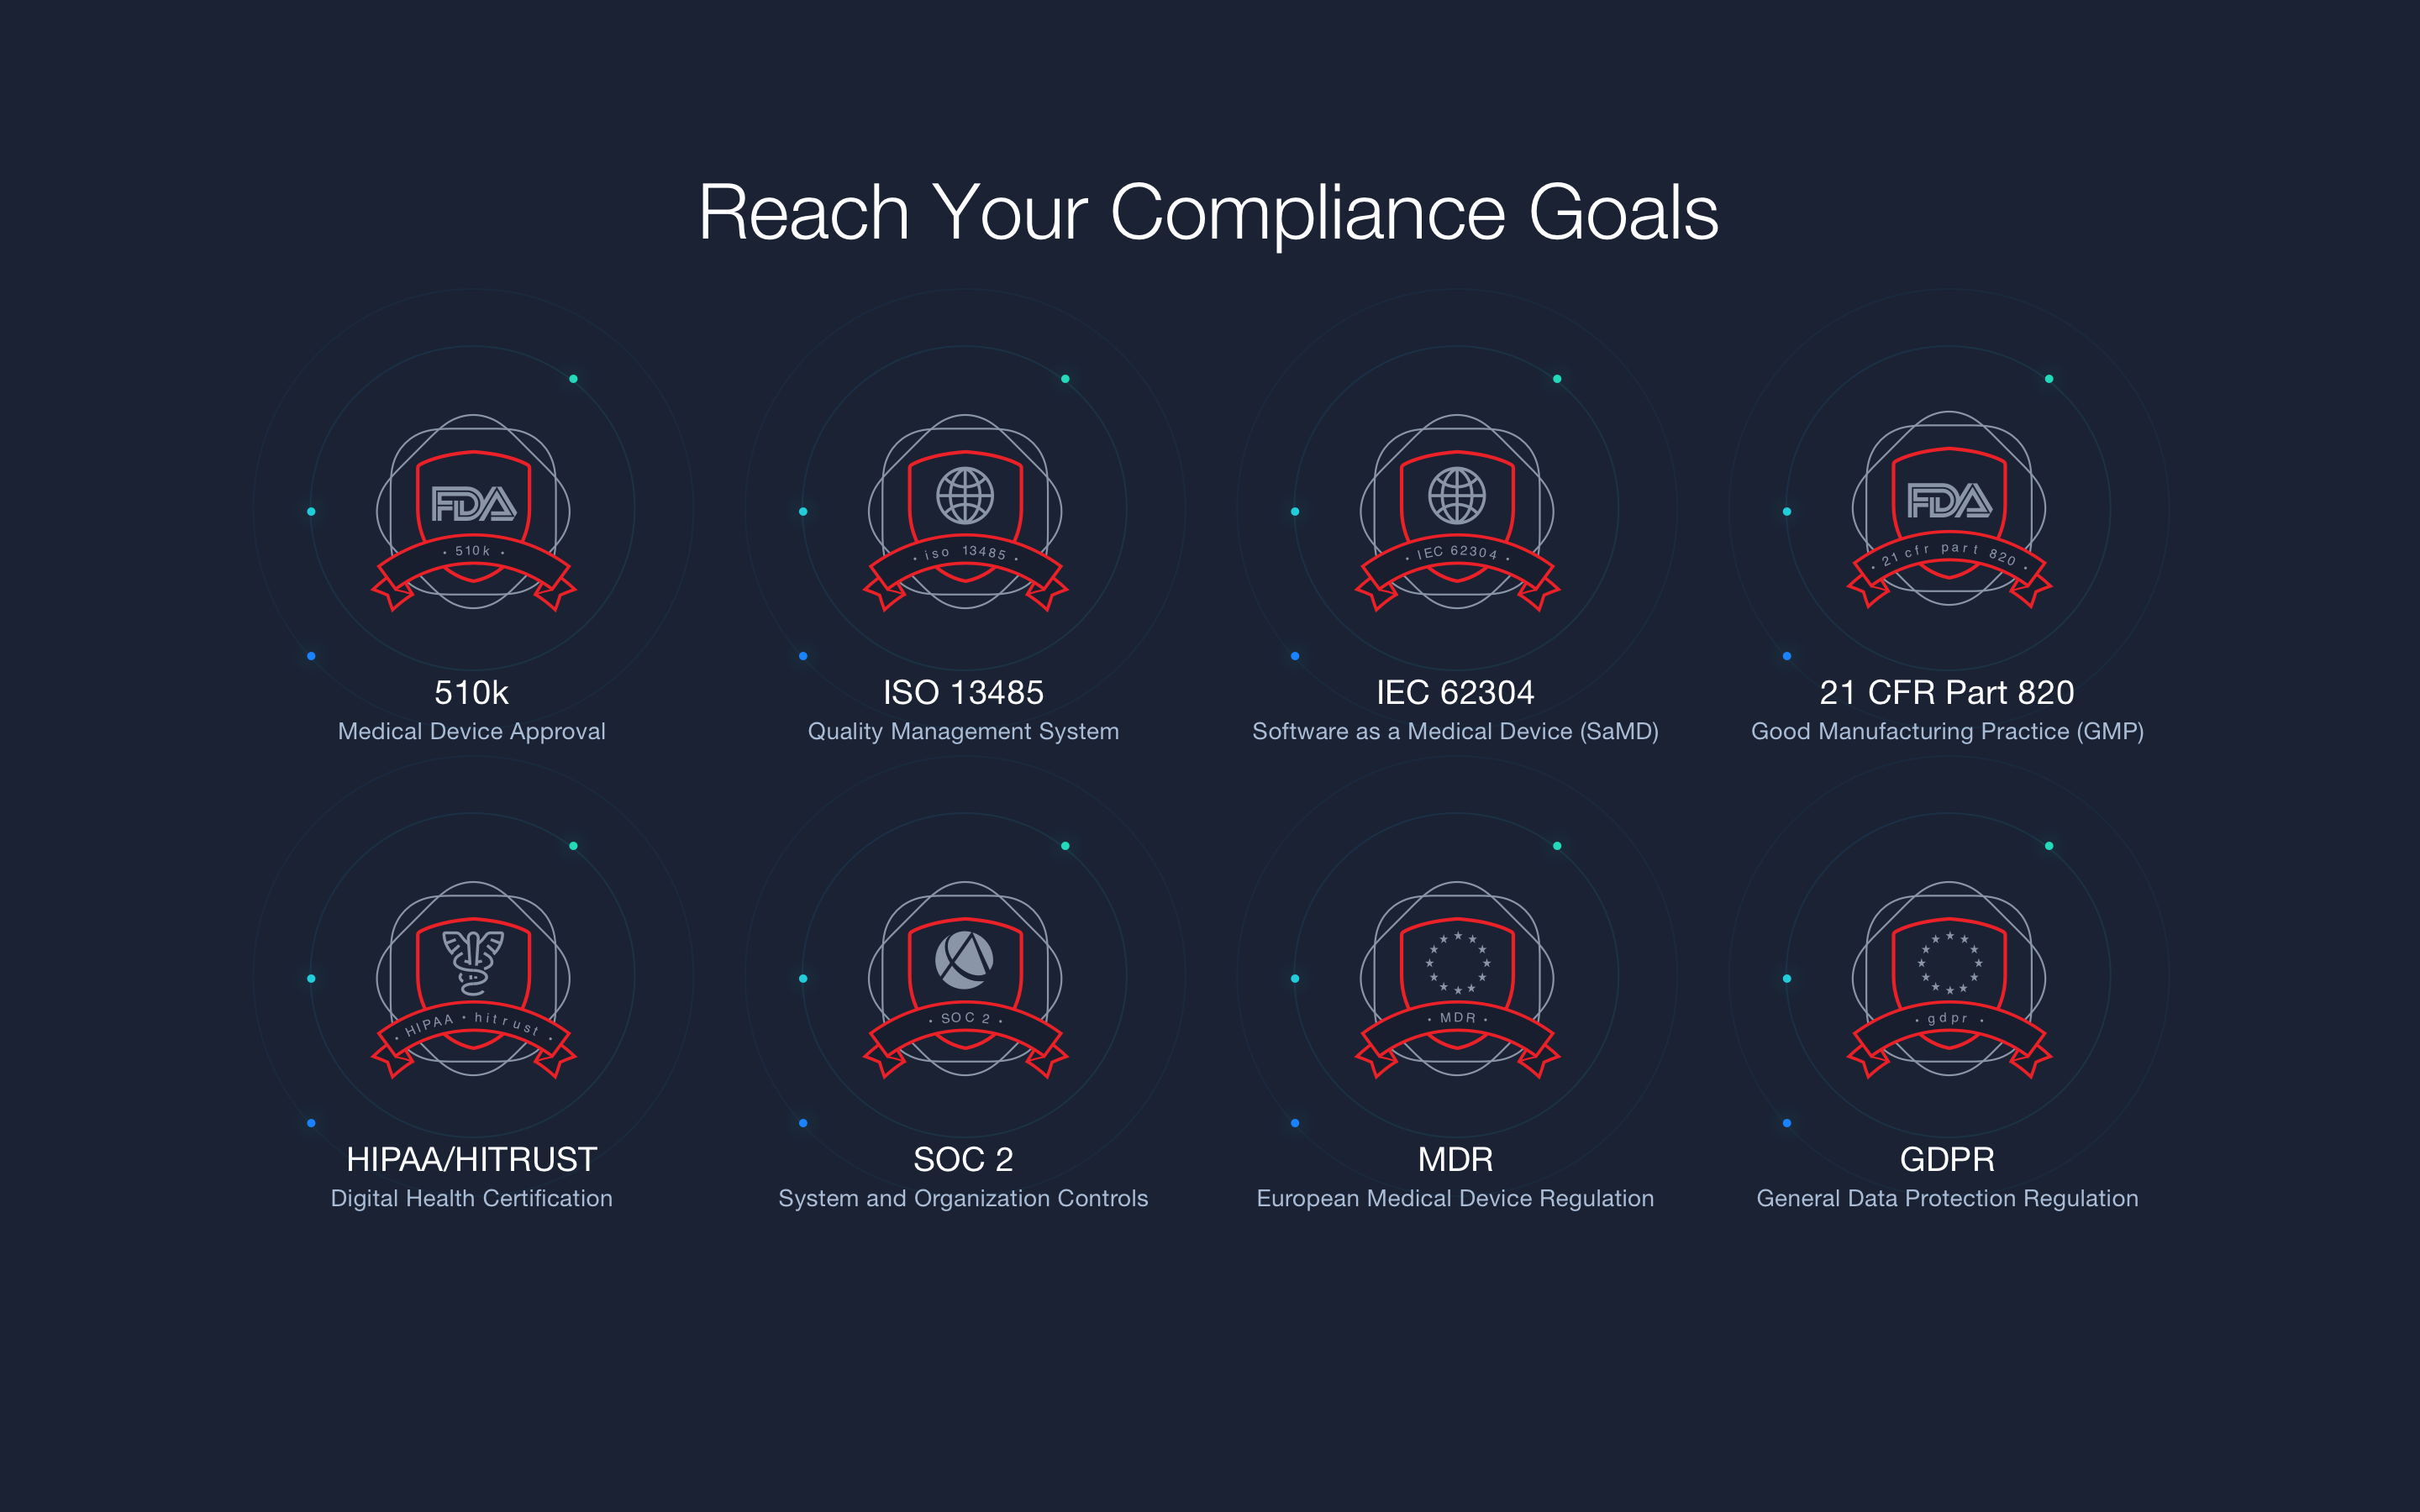 Sierra QMS Software - Strategically map out your quality journey, ensuring you reach each of your compliance milestones in your desired timeframes. Let’s take the stress out of Approvals, Certifications, and Audits with an actionable, step-by-step implementation plan.